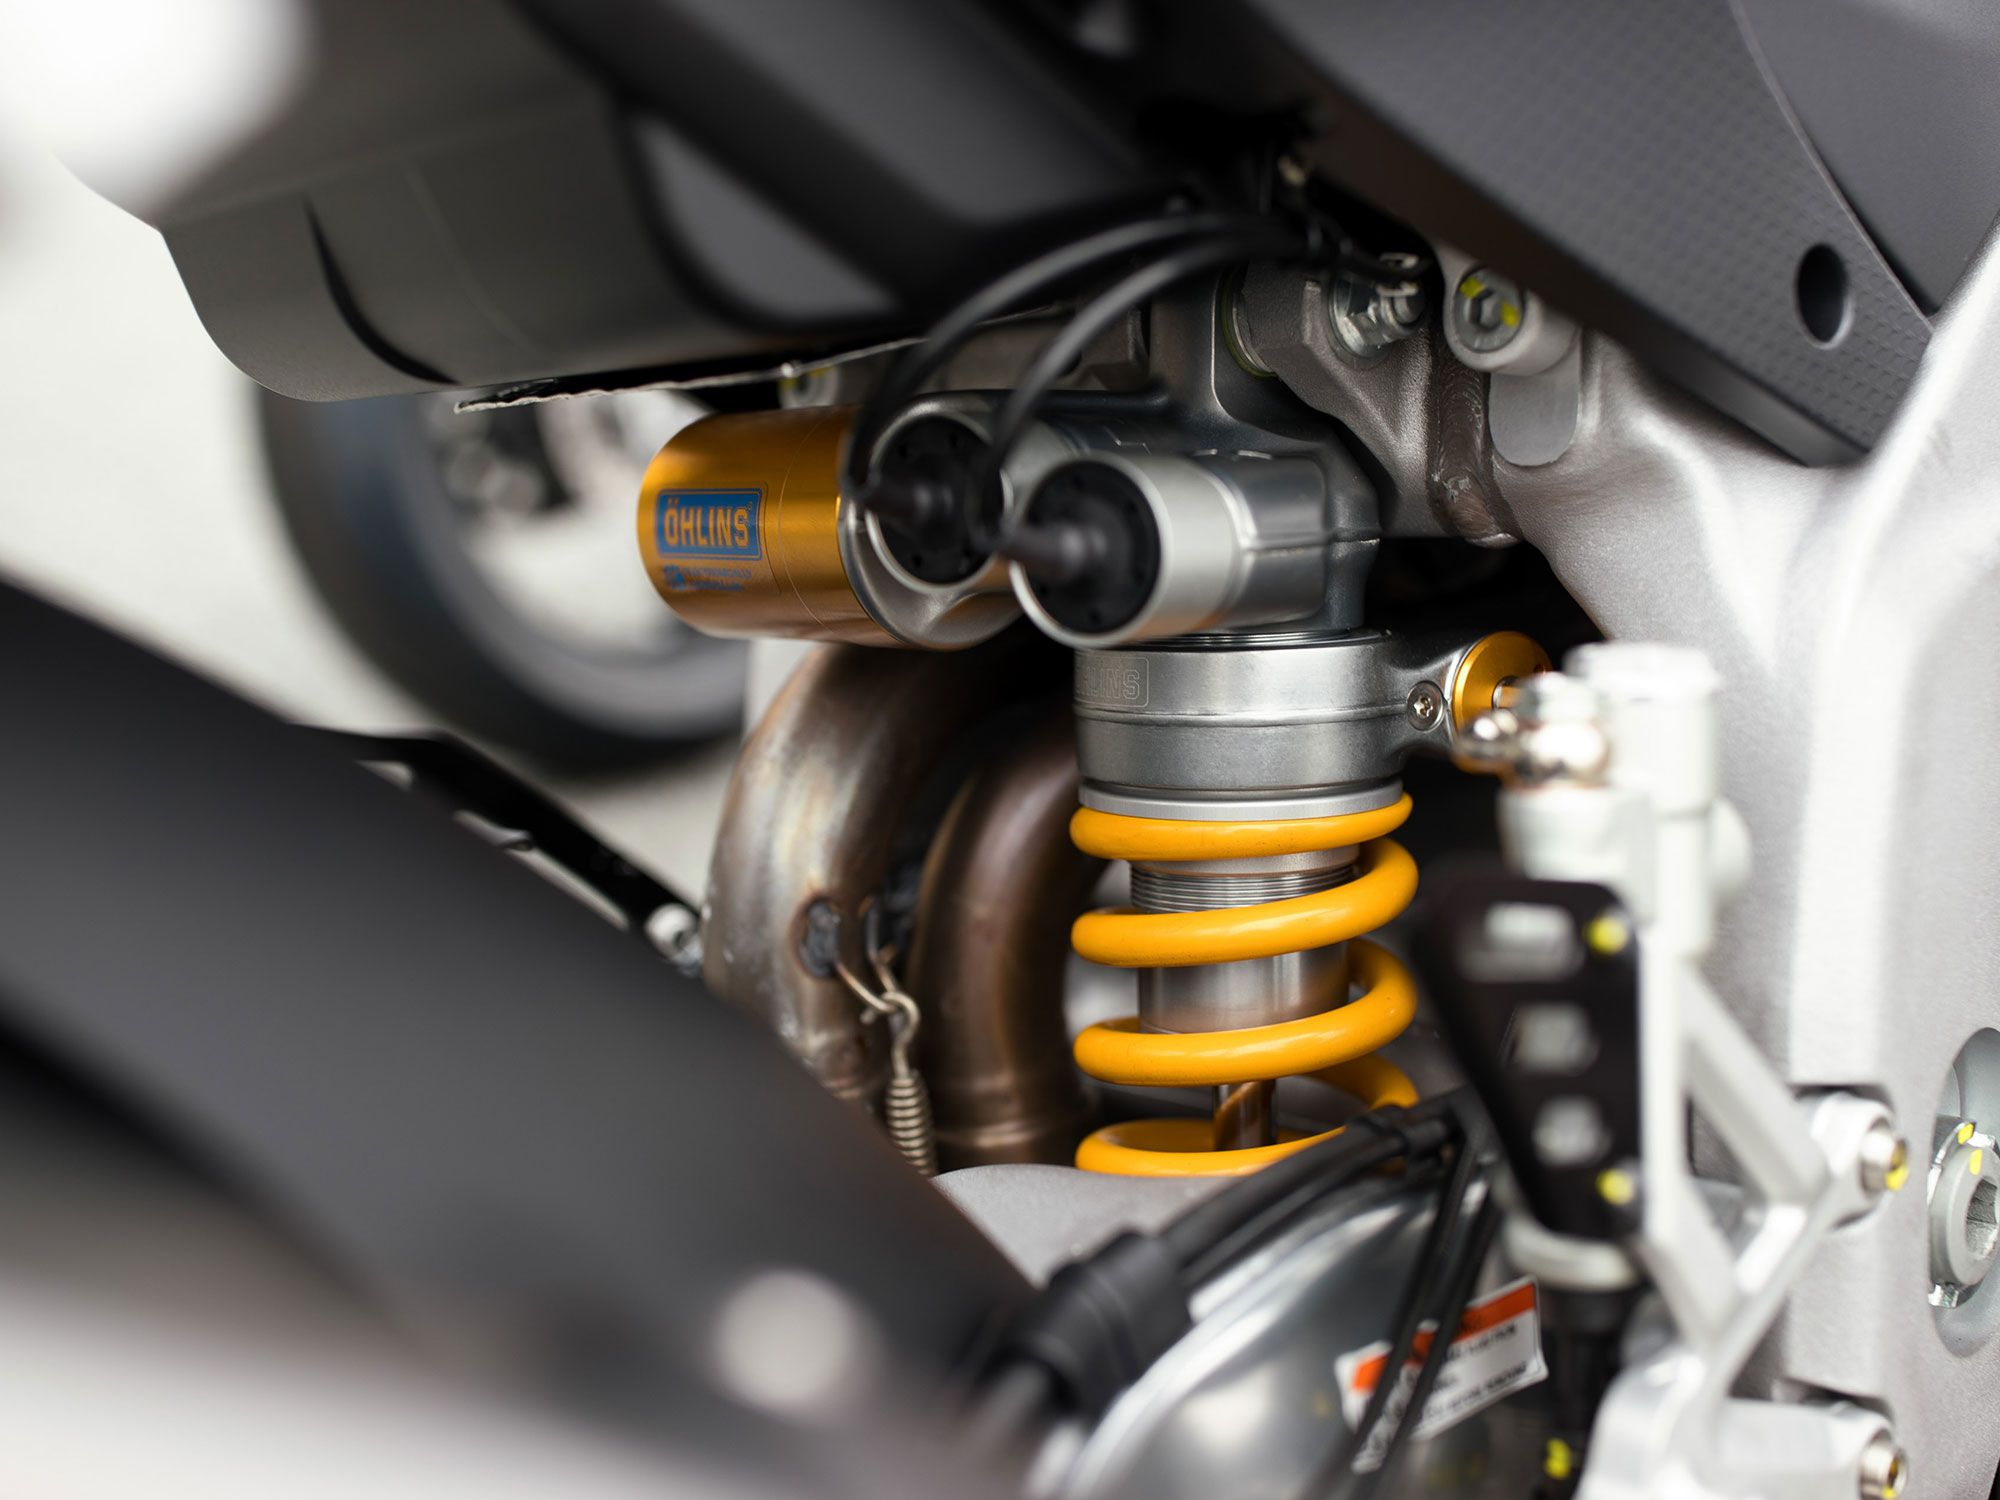 The Factory’s semi-active Öhlins suspenders help take the guesswork out of suspension setup.